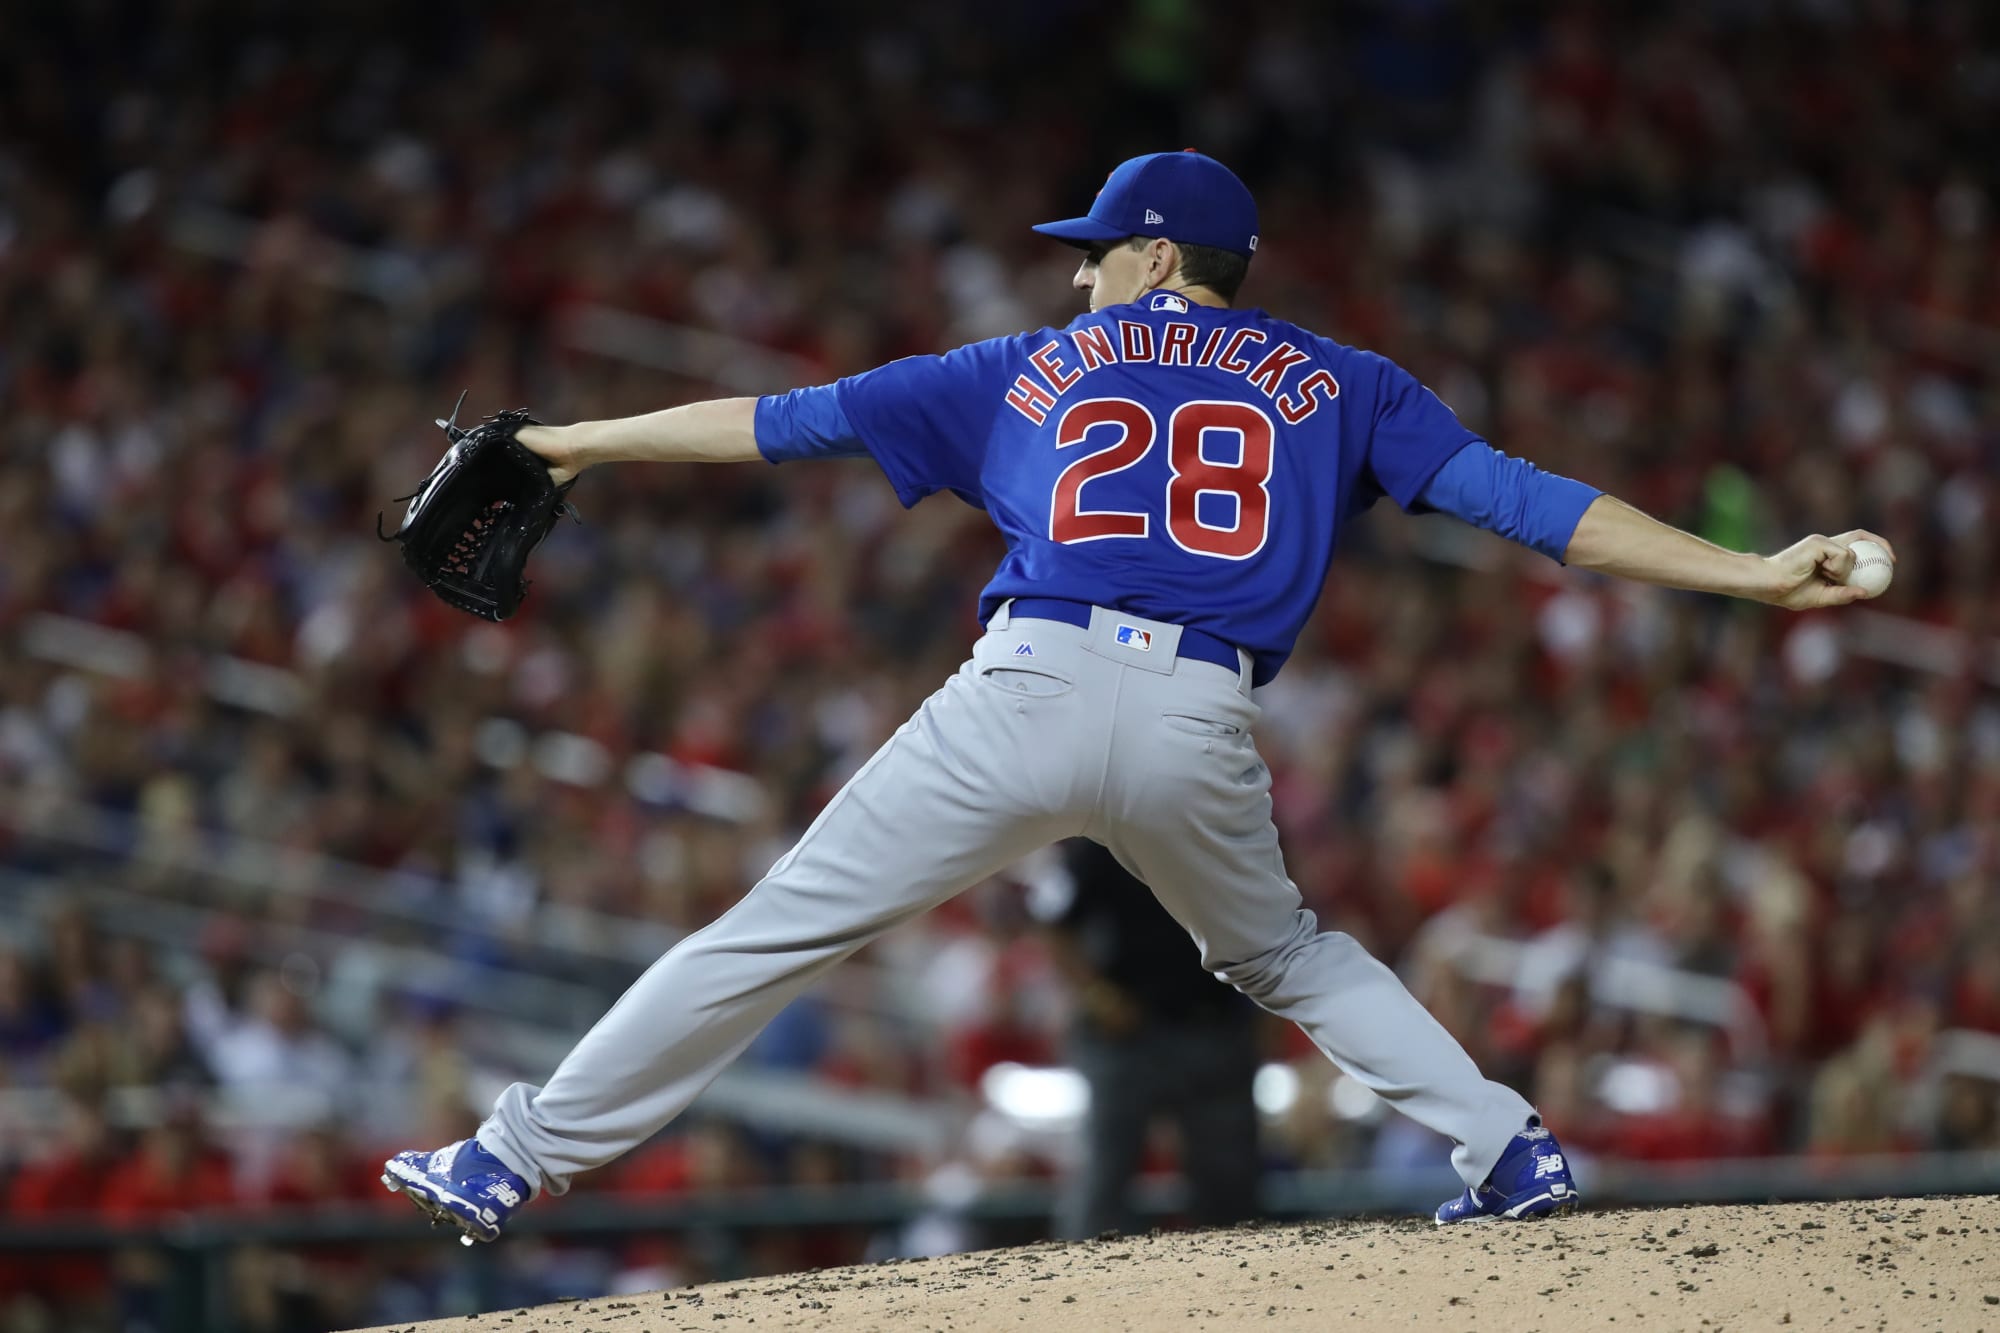 Chicago Cubs Win game 1 behind bats of Bryant and Rizzo